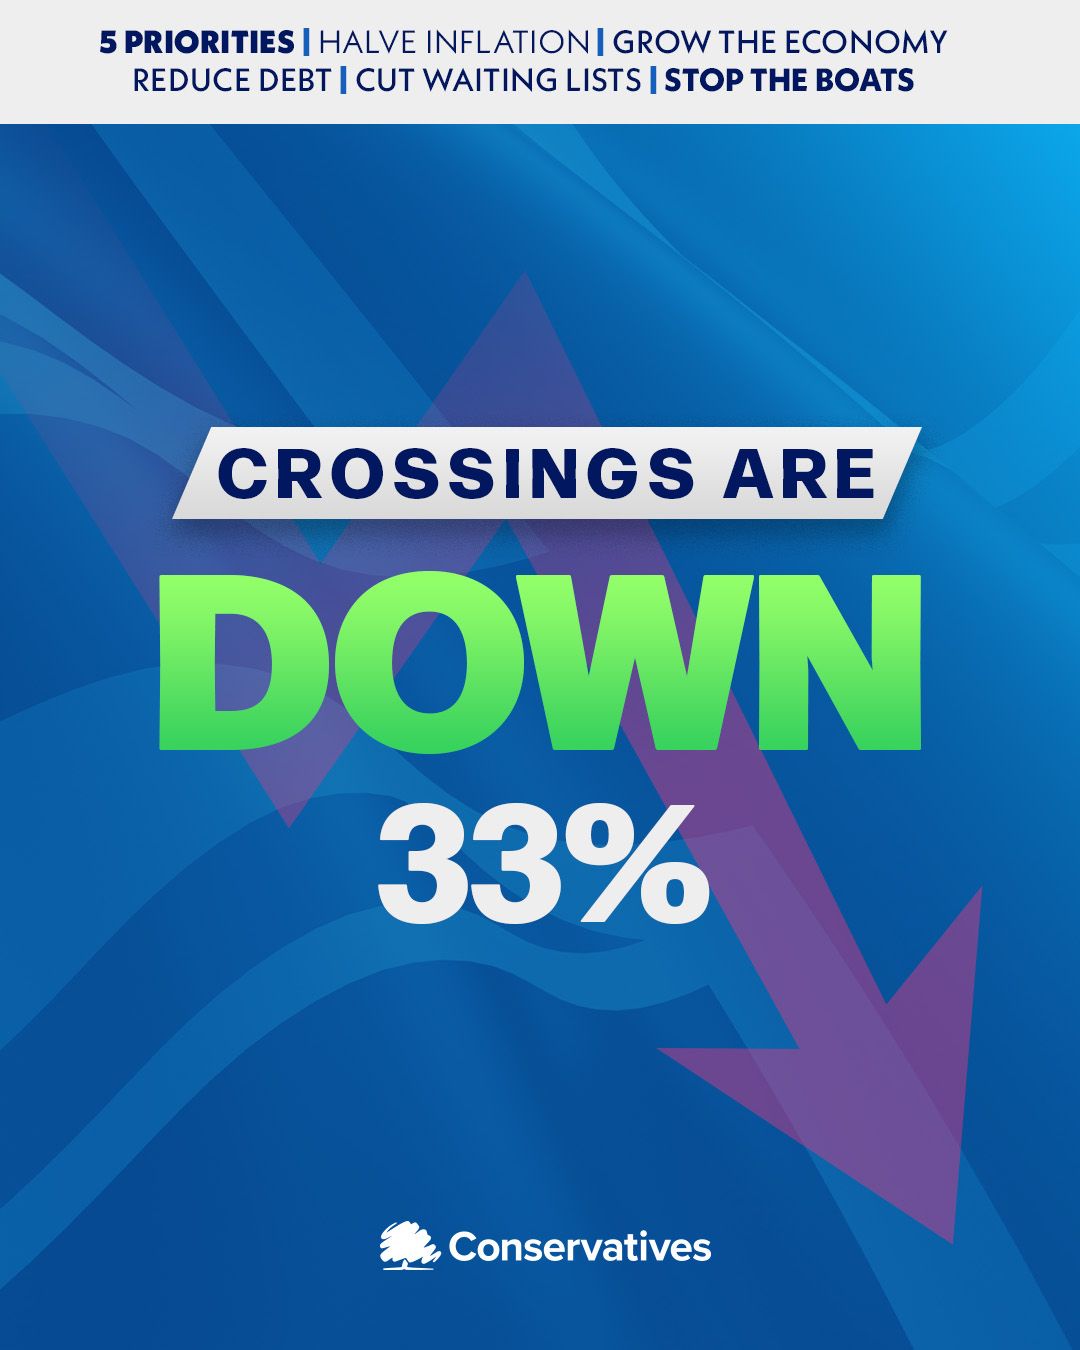 Rishi is delivering: small boat crossings down 33%